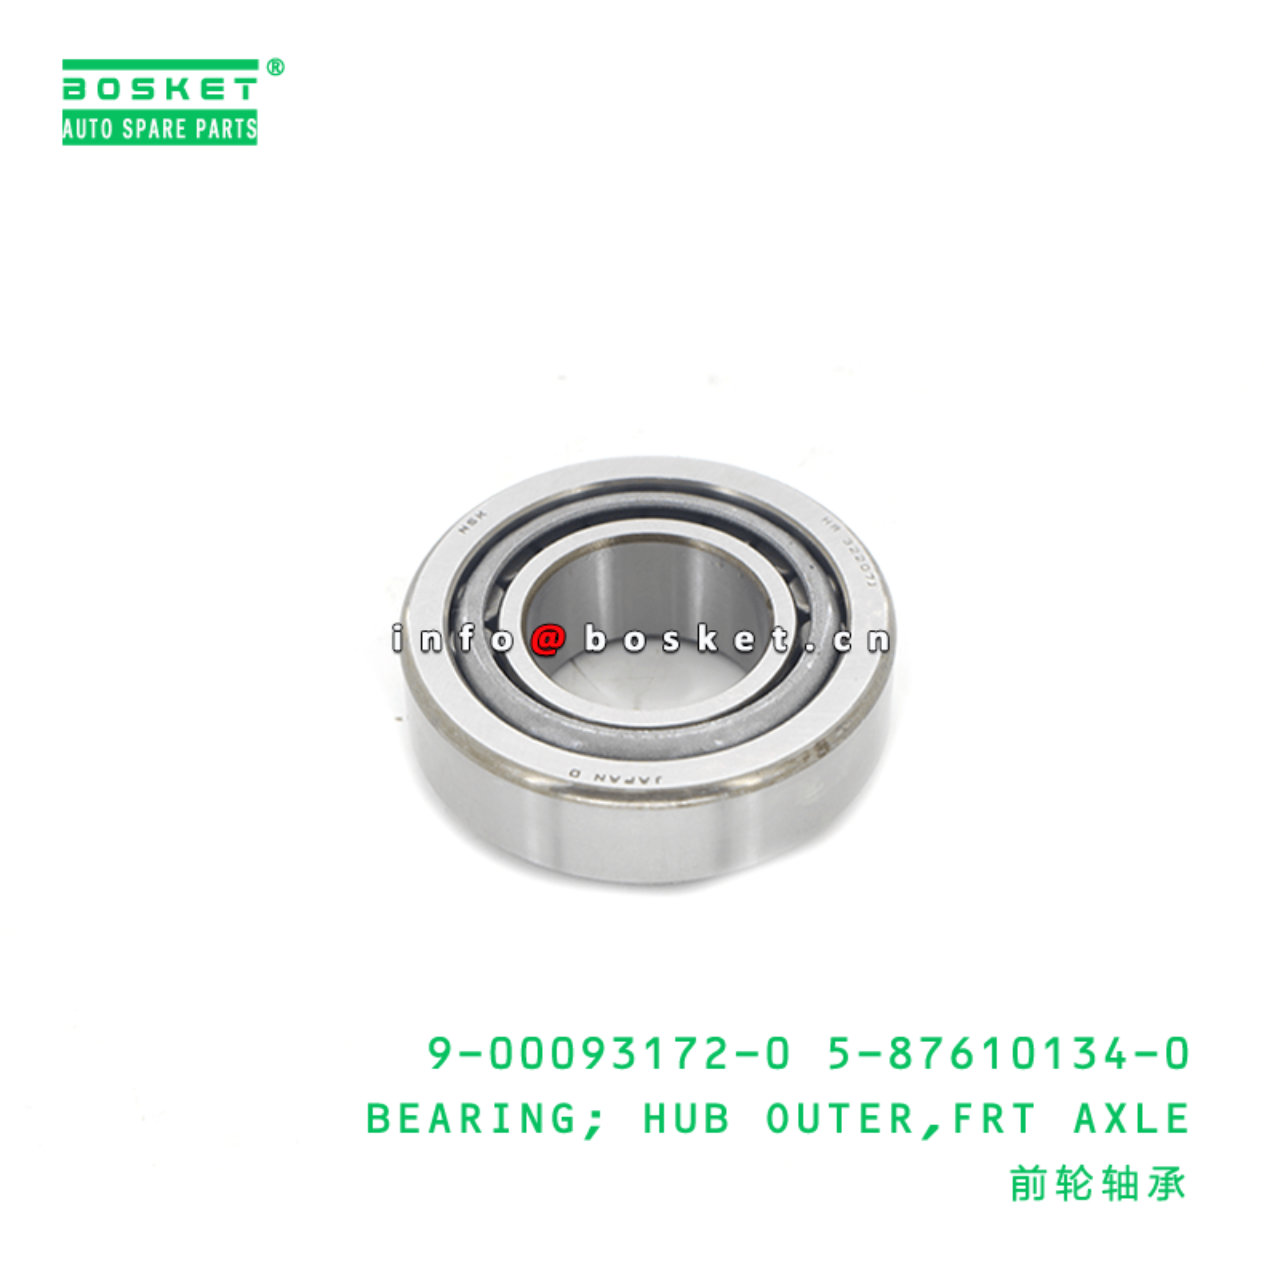 9-00093172-0 5-87610134-0 Front Axle Hub Outer Bearing 9000931720 5876101340 Suitable for ISUZU NKR5